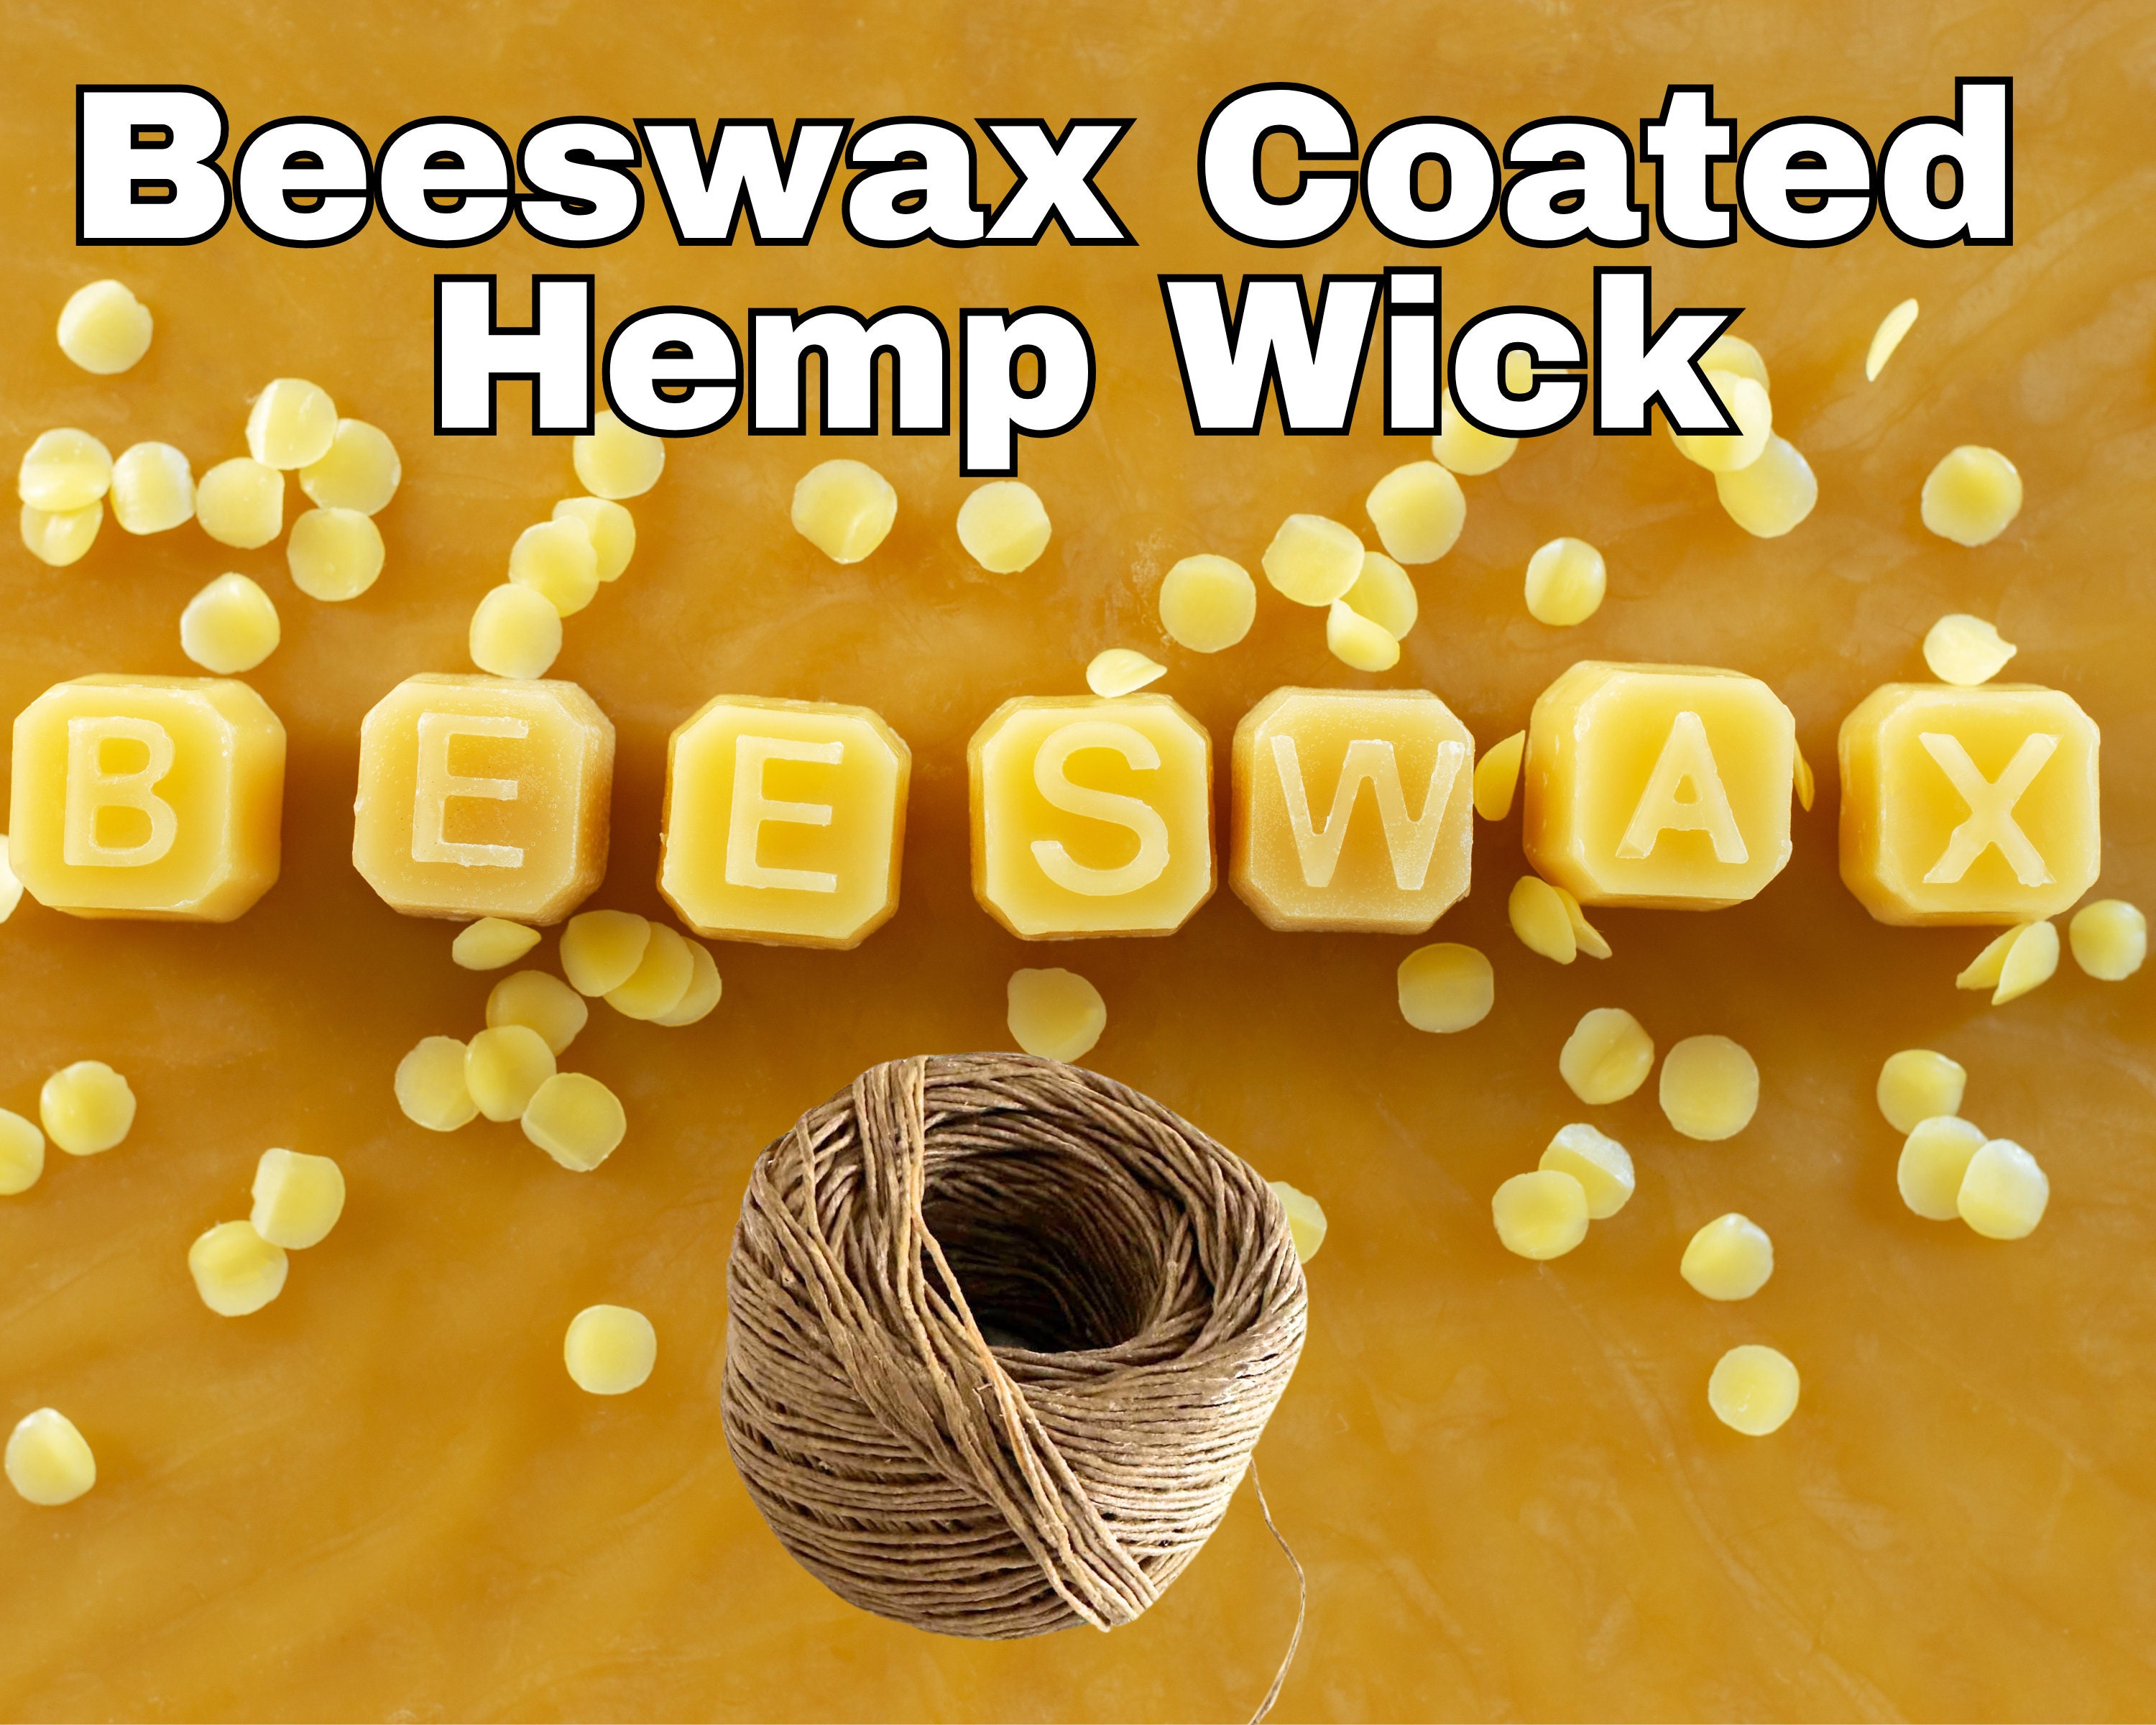  50 PCS 6 inch Hemp Candle Wicks kit, 2.5mm Beeswax Candle Wicks  for DIY Bulk Natural Candle Wicks for Beeswax Candle Making Hemp Edible  Candle Wick for Butter Candle